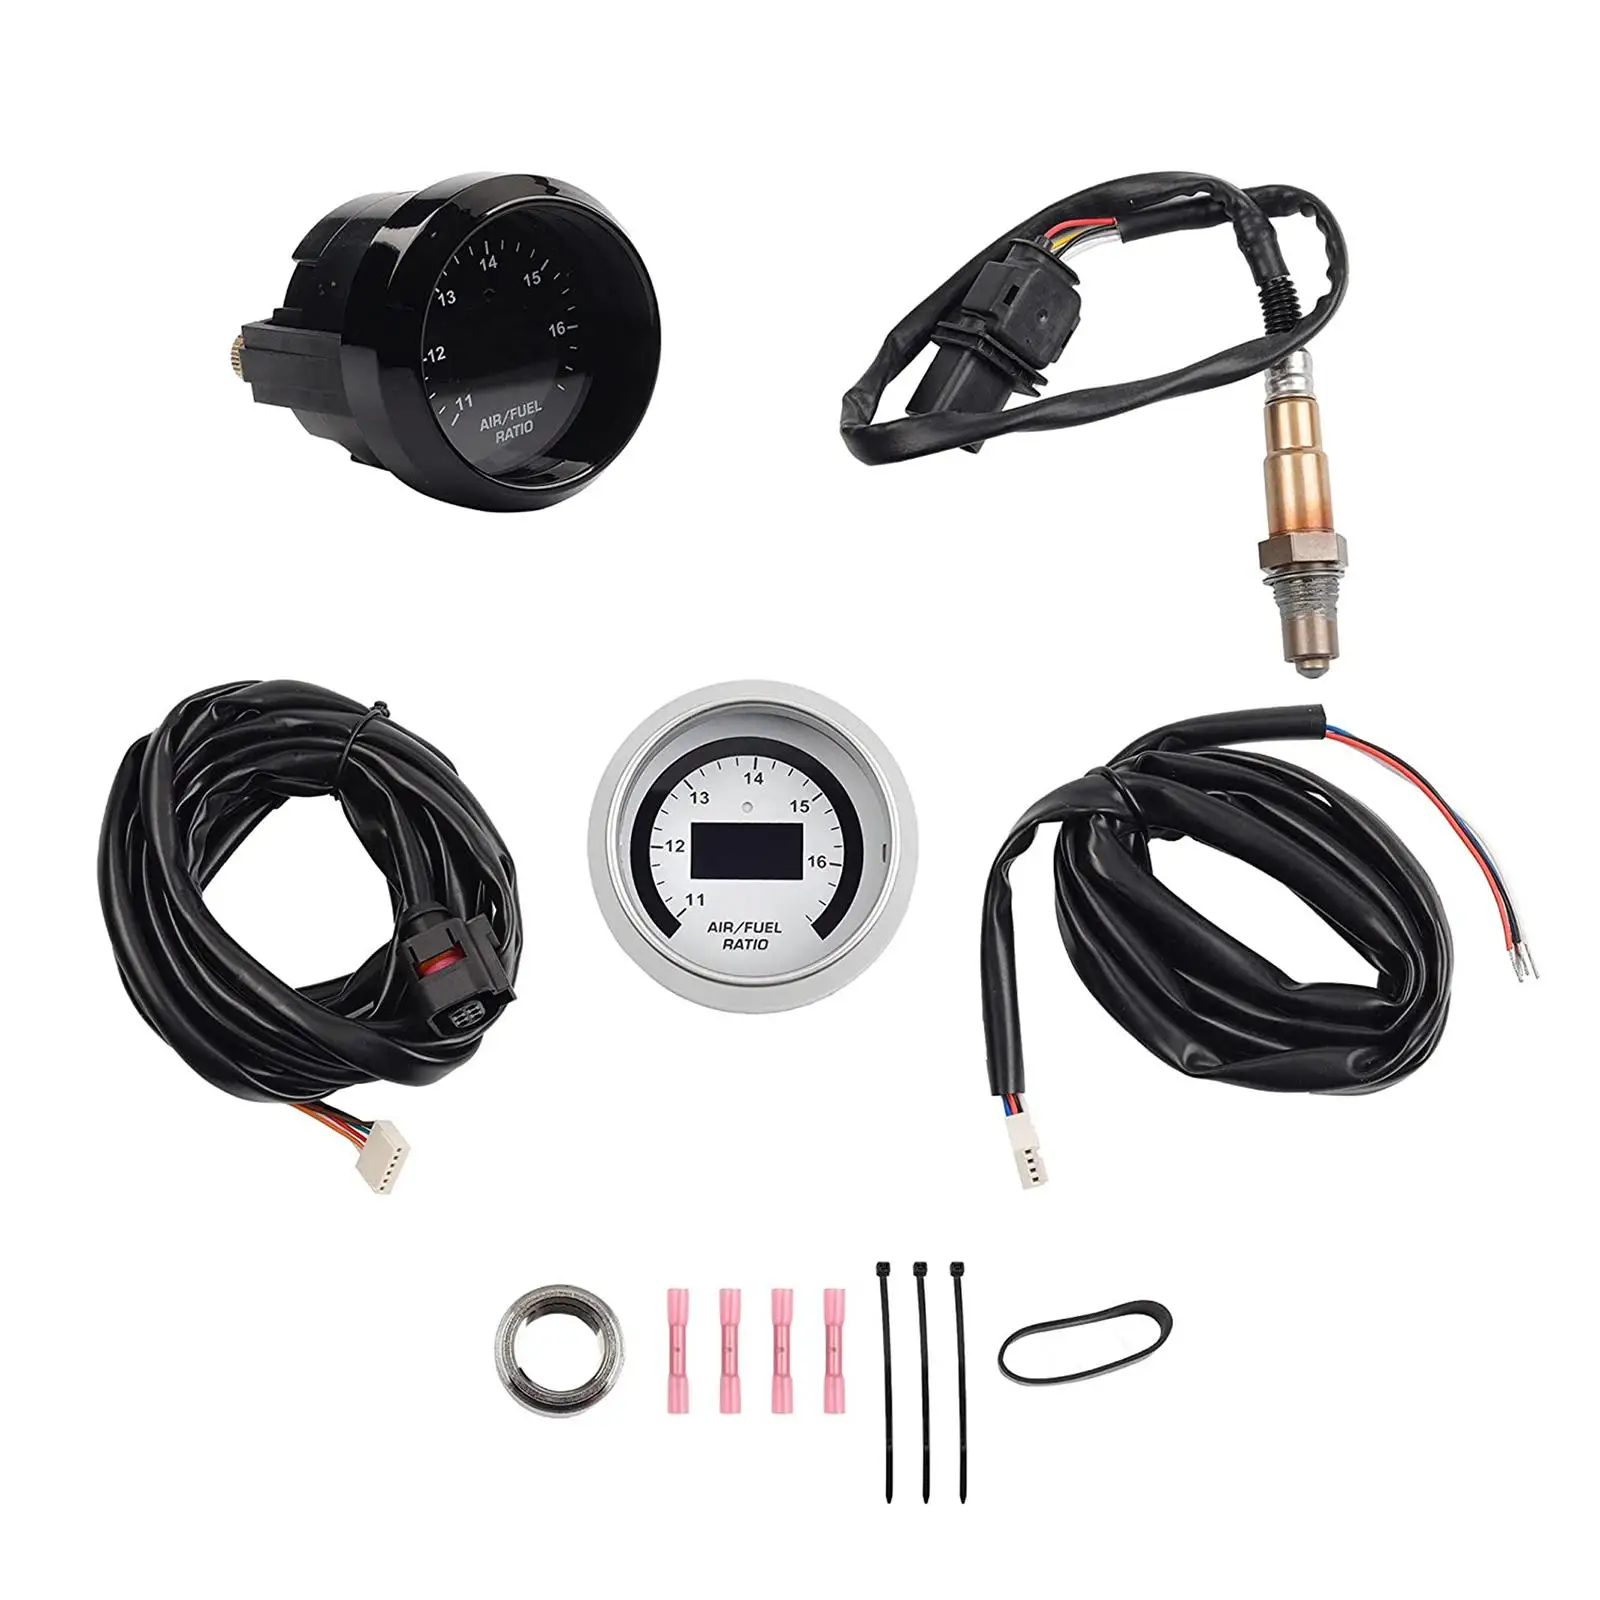 Air Fuel Ratio Gauge Kit Accessory Replaces Easy Installation Spare Parts Easy to Read Repair Parts 30-4110 Controller Gauge Set